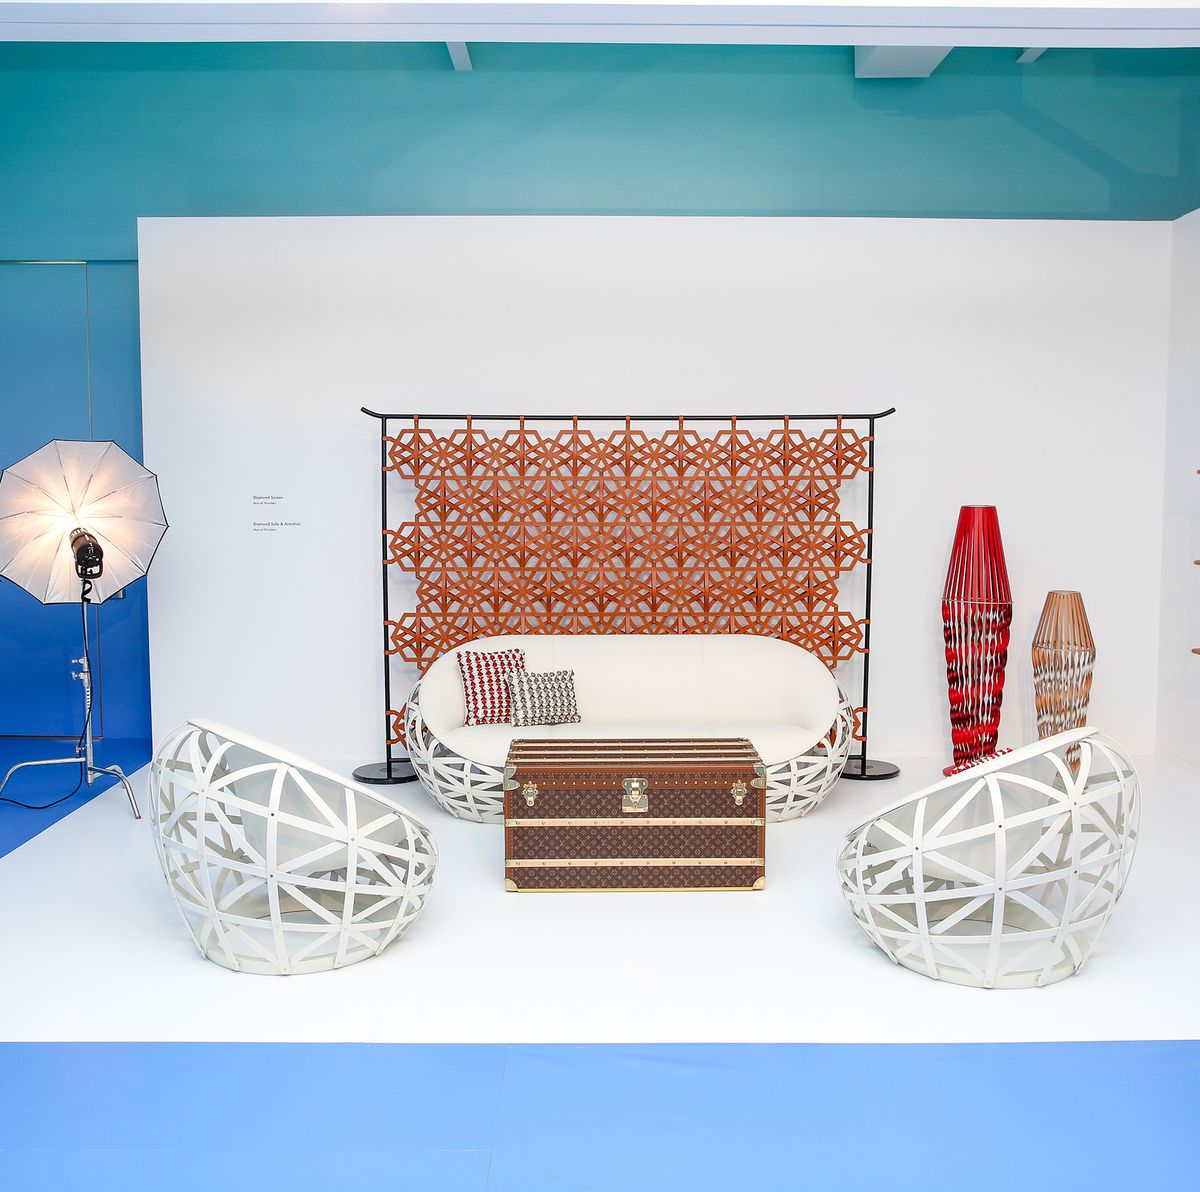 Louis Vuitton launches collection of travel-inspired home accessories